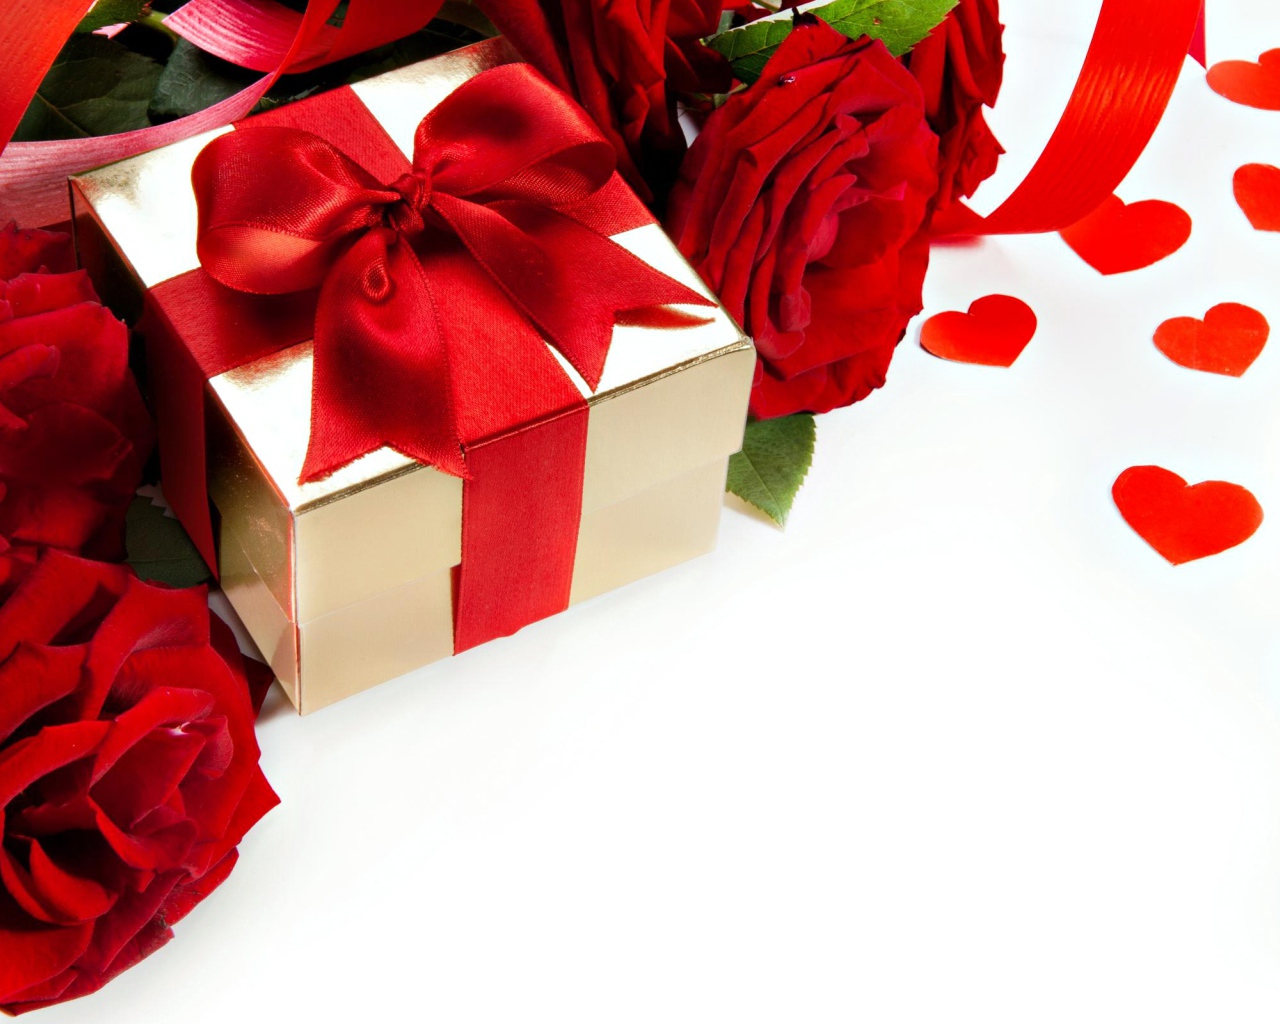 A gift with a red bow on a white background with red roses and hearts